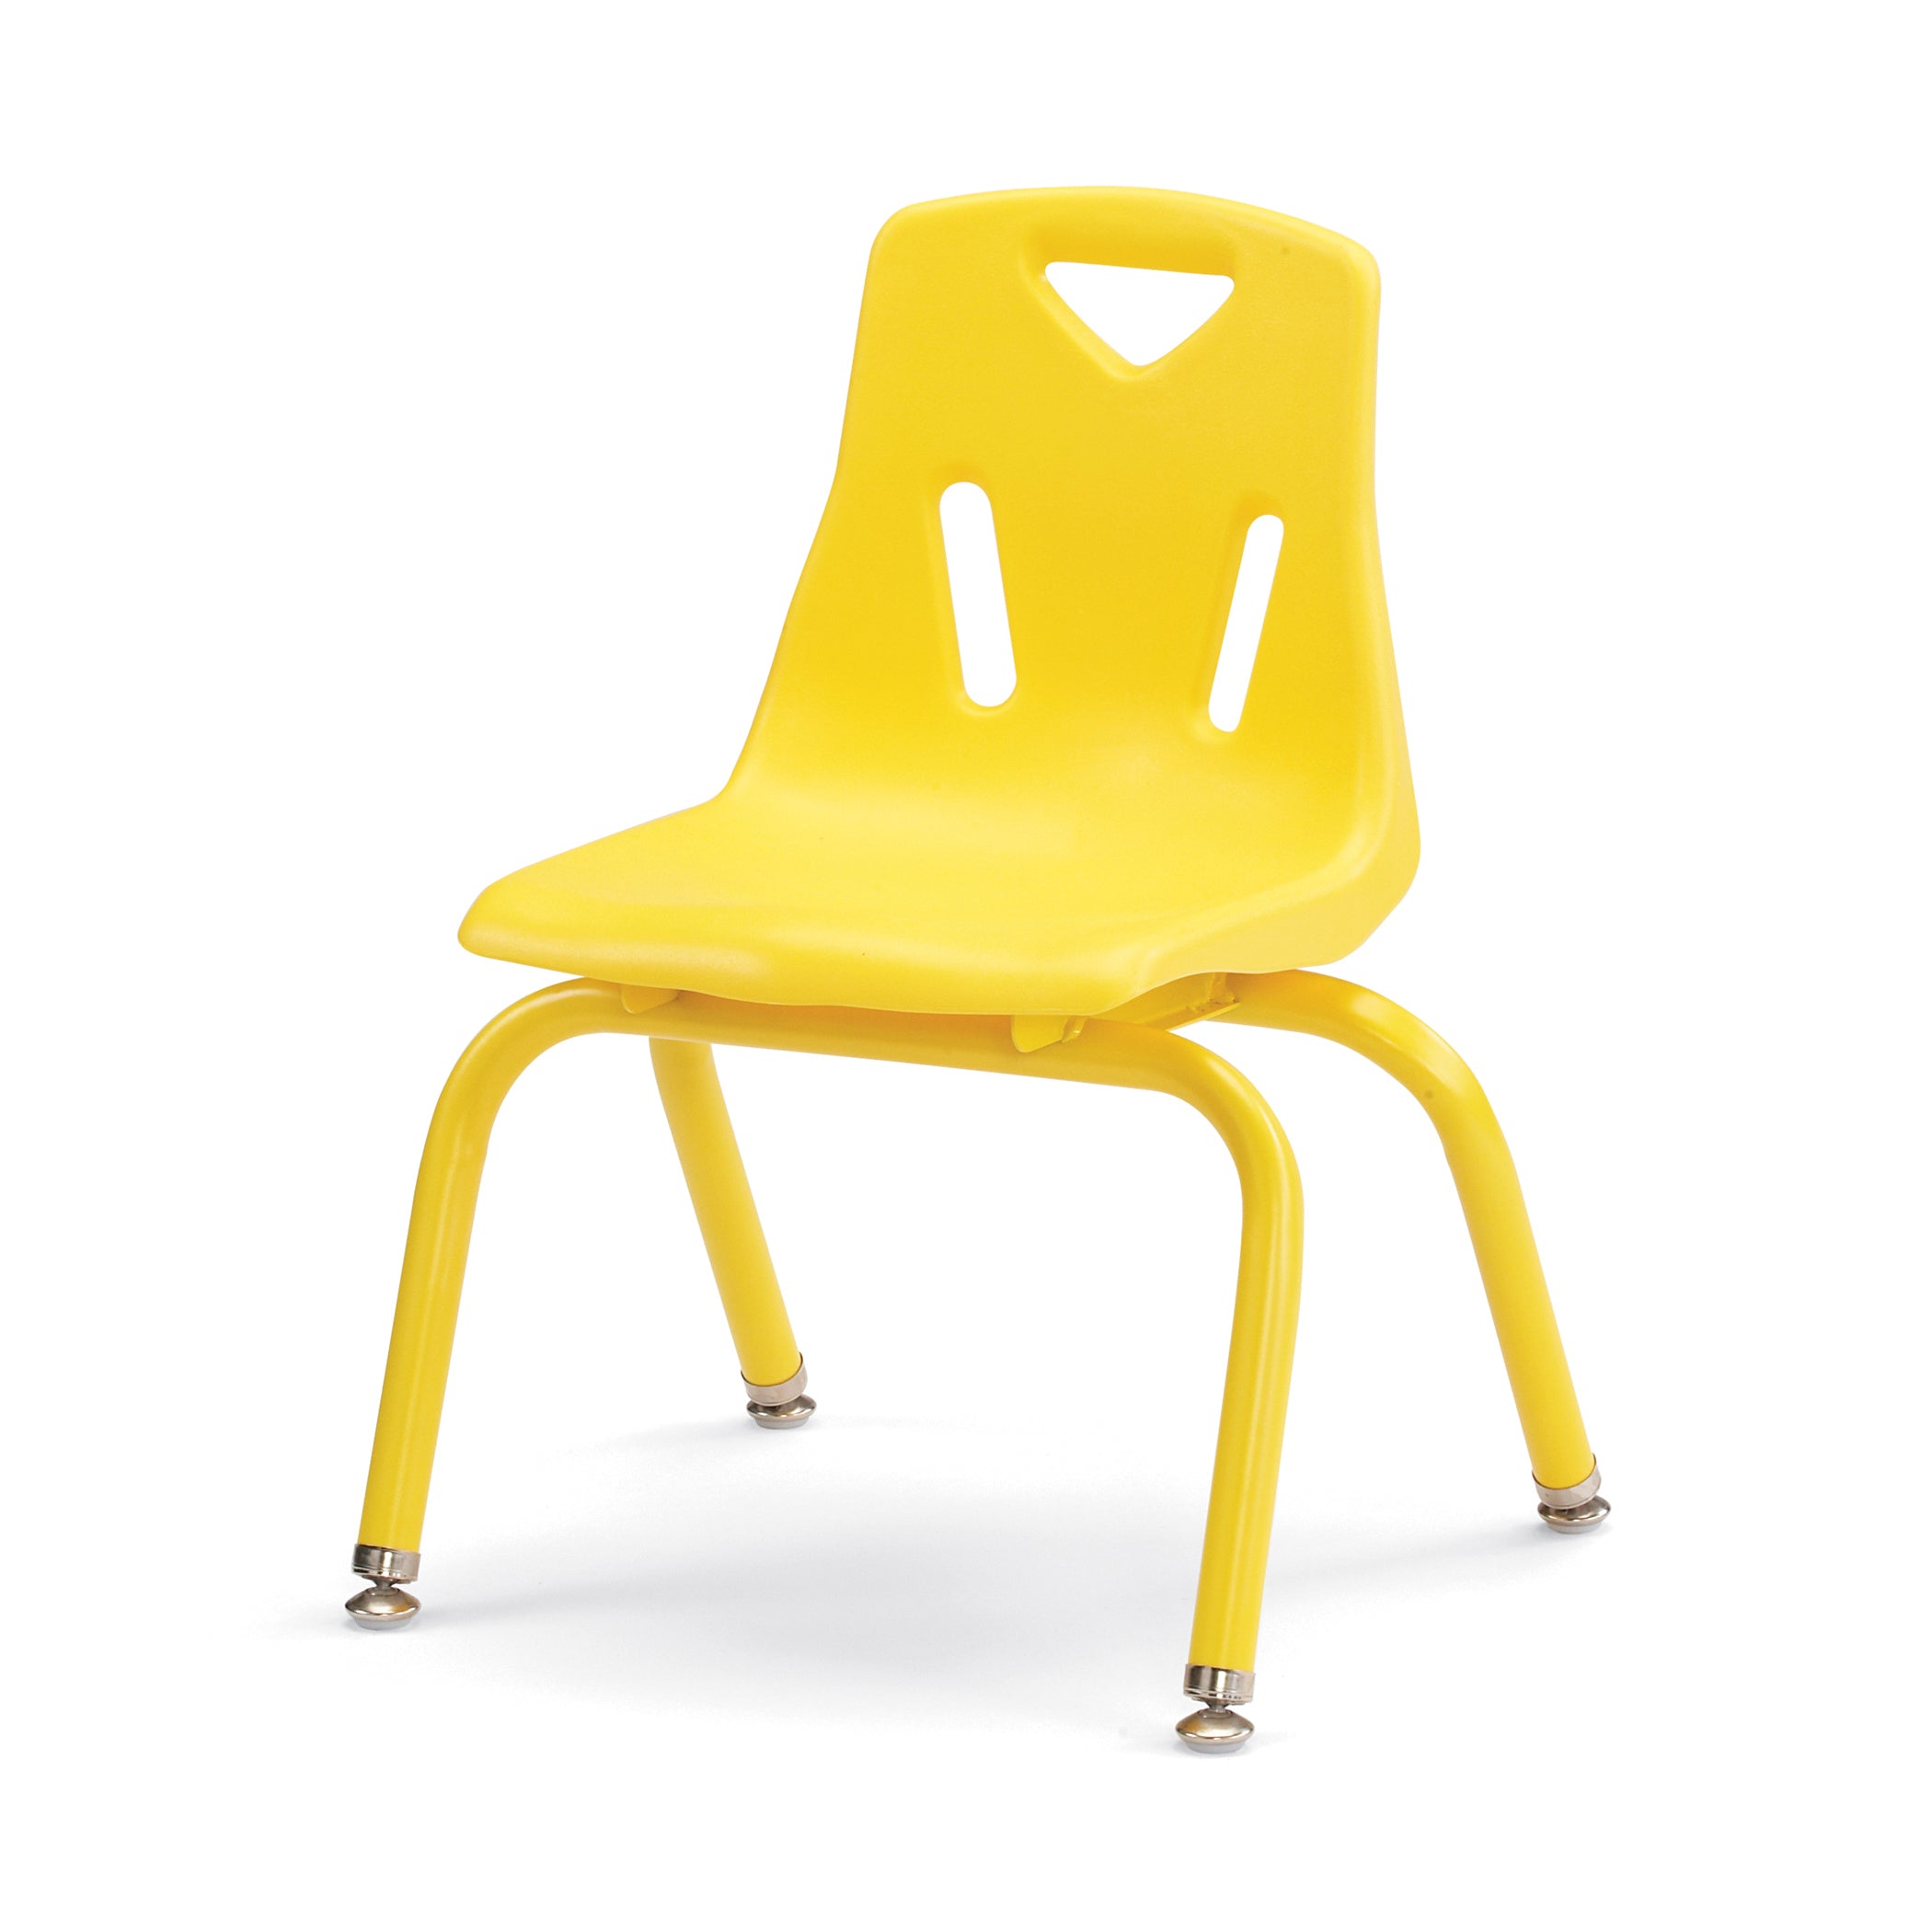 8122JC6007, Berries Stacking Chairs with Powder-Coated Legs - 12" Ht - Set of 6 - Yellow